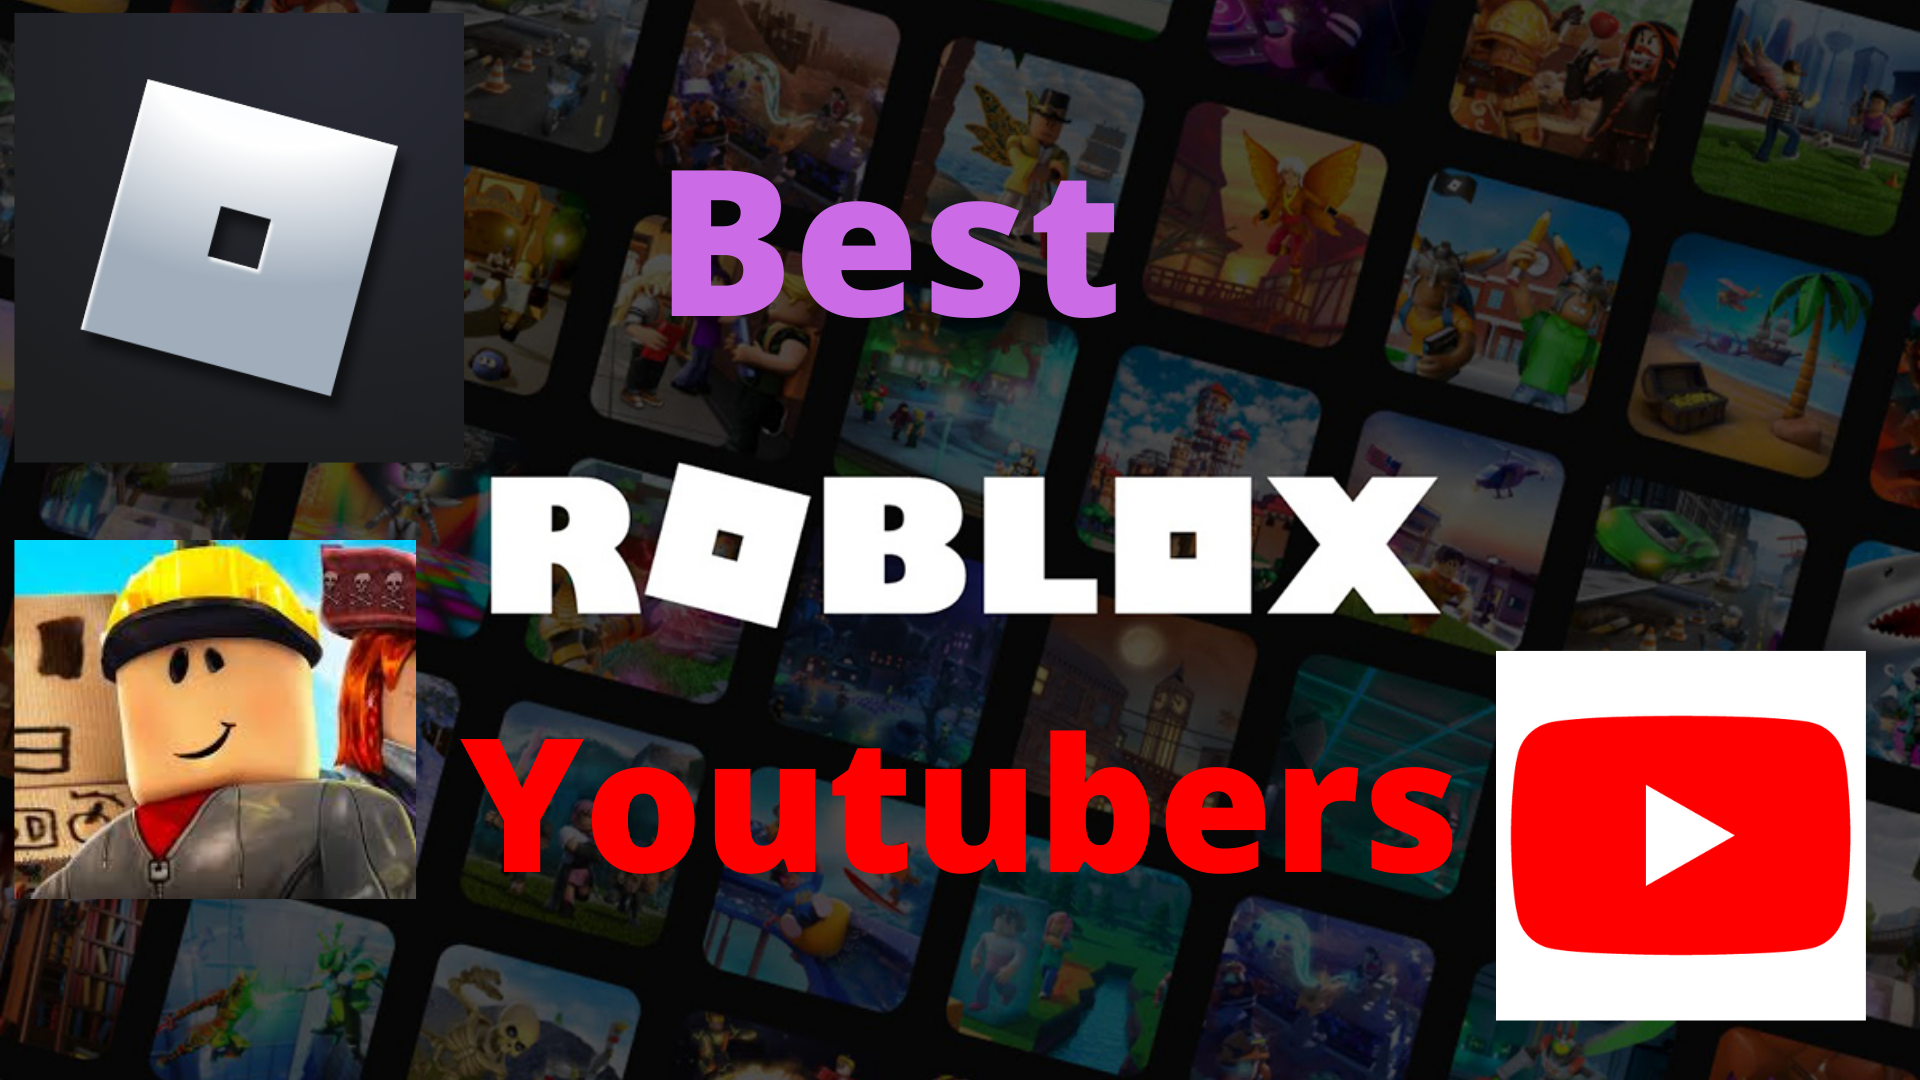 How To Install Roblox On Ps4 Web Browser